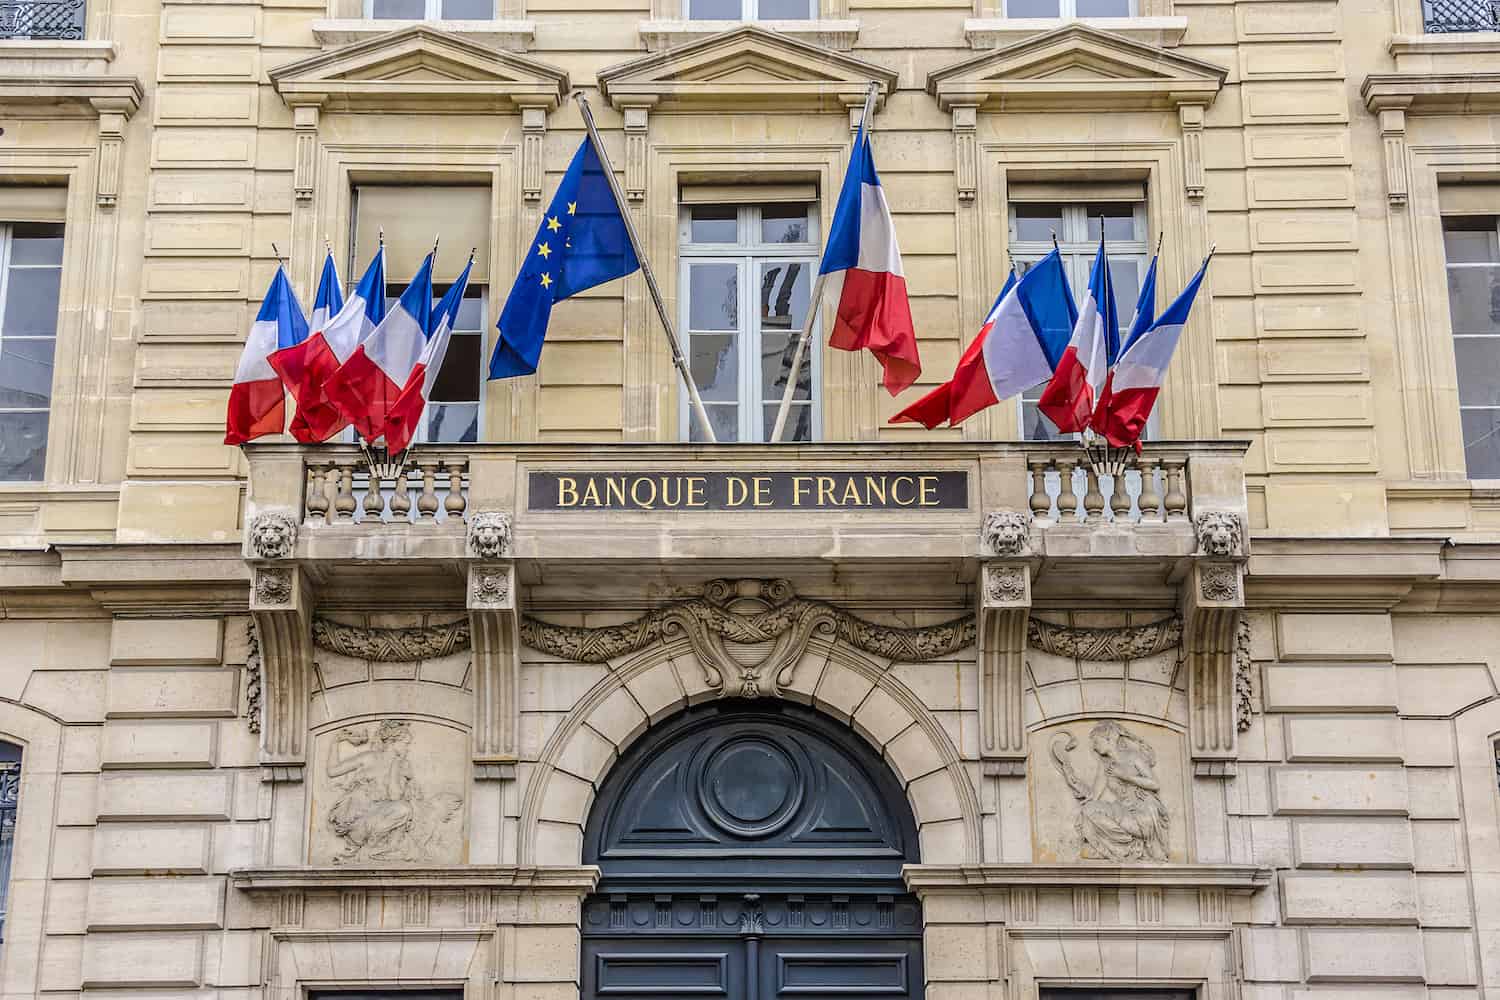 The Ethereum incubator will provide the necessary technology to the French government in its foray into the crypto universe